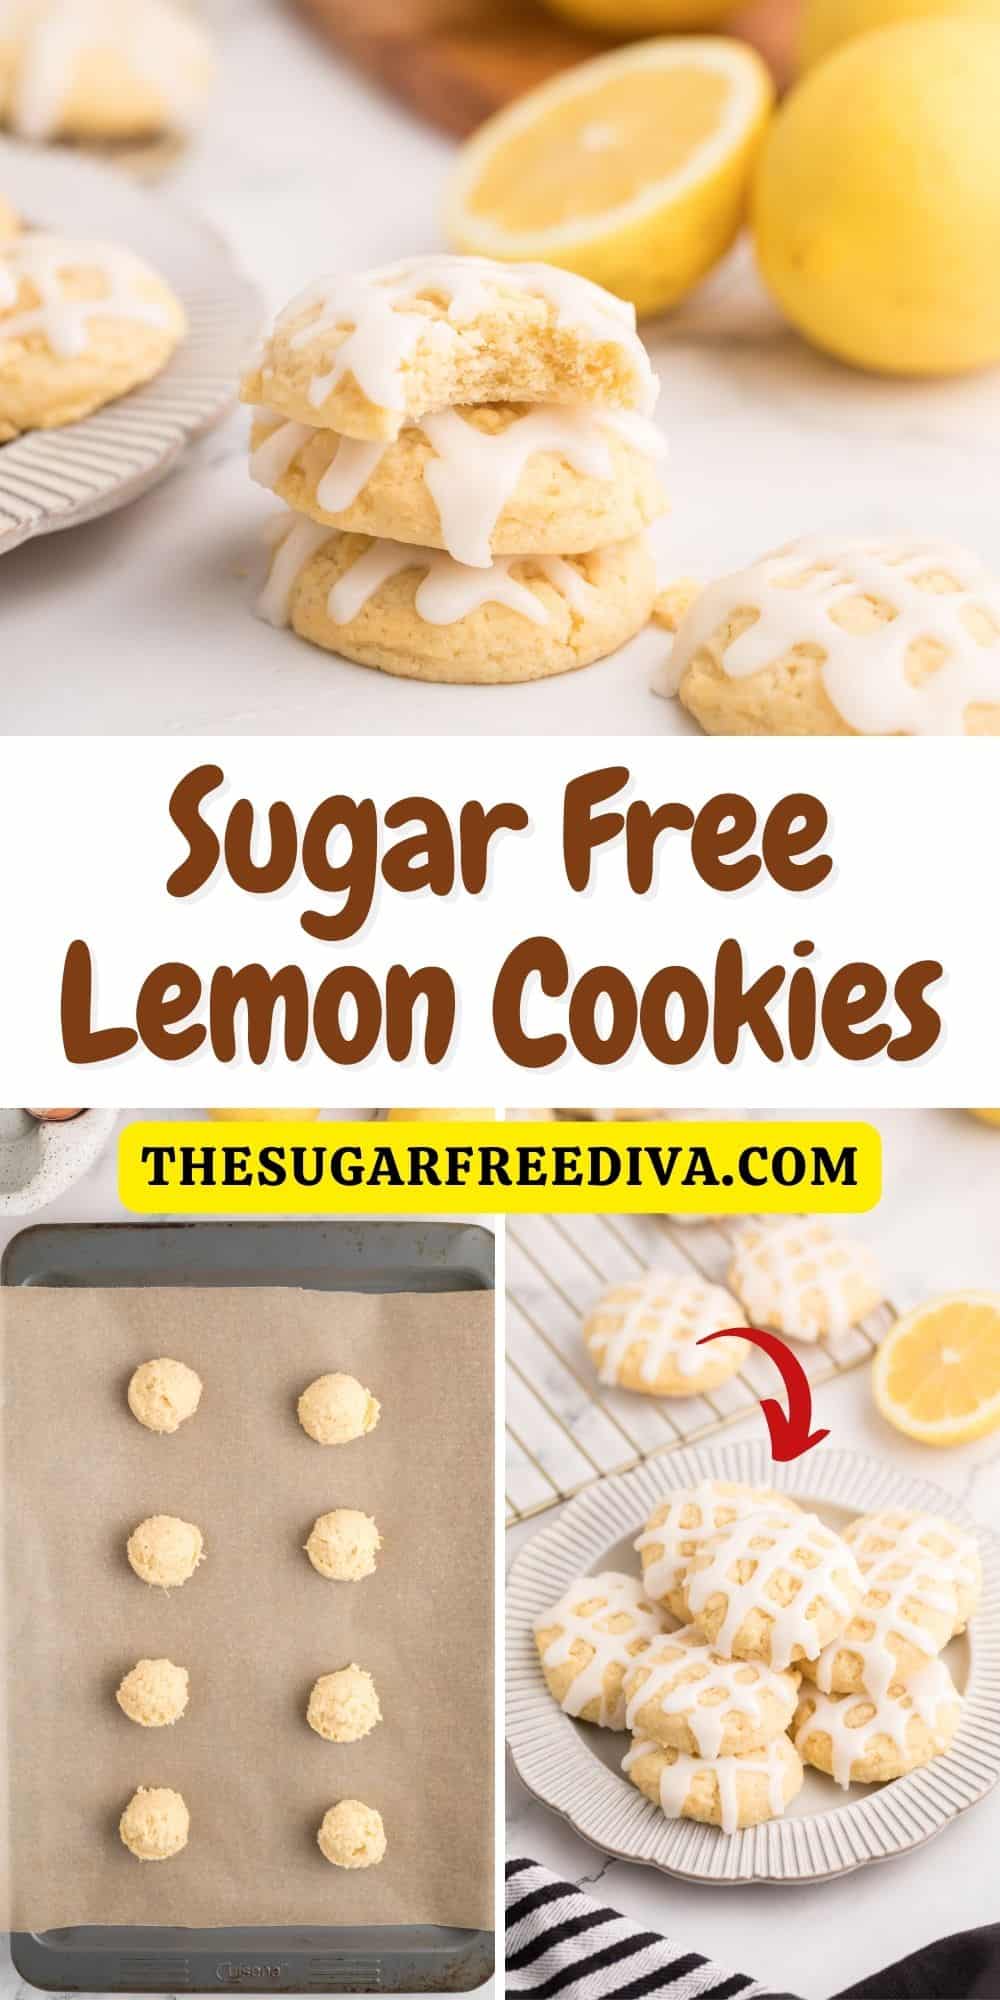 Sugar Free Lemon Cookies, a simple and delicious recipe for buttery soft cookies made with no added sugar. Optional sugar free glaze.